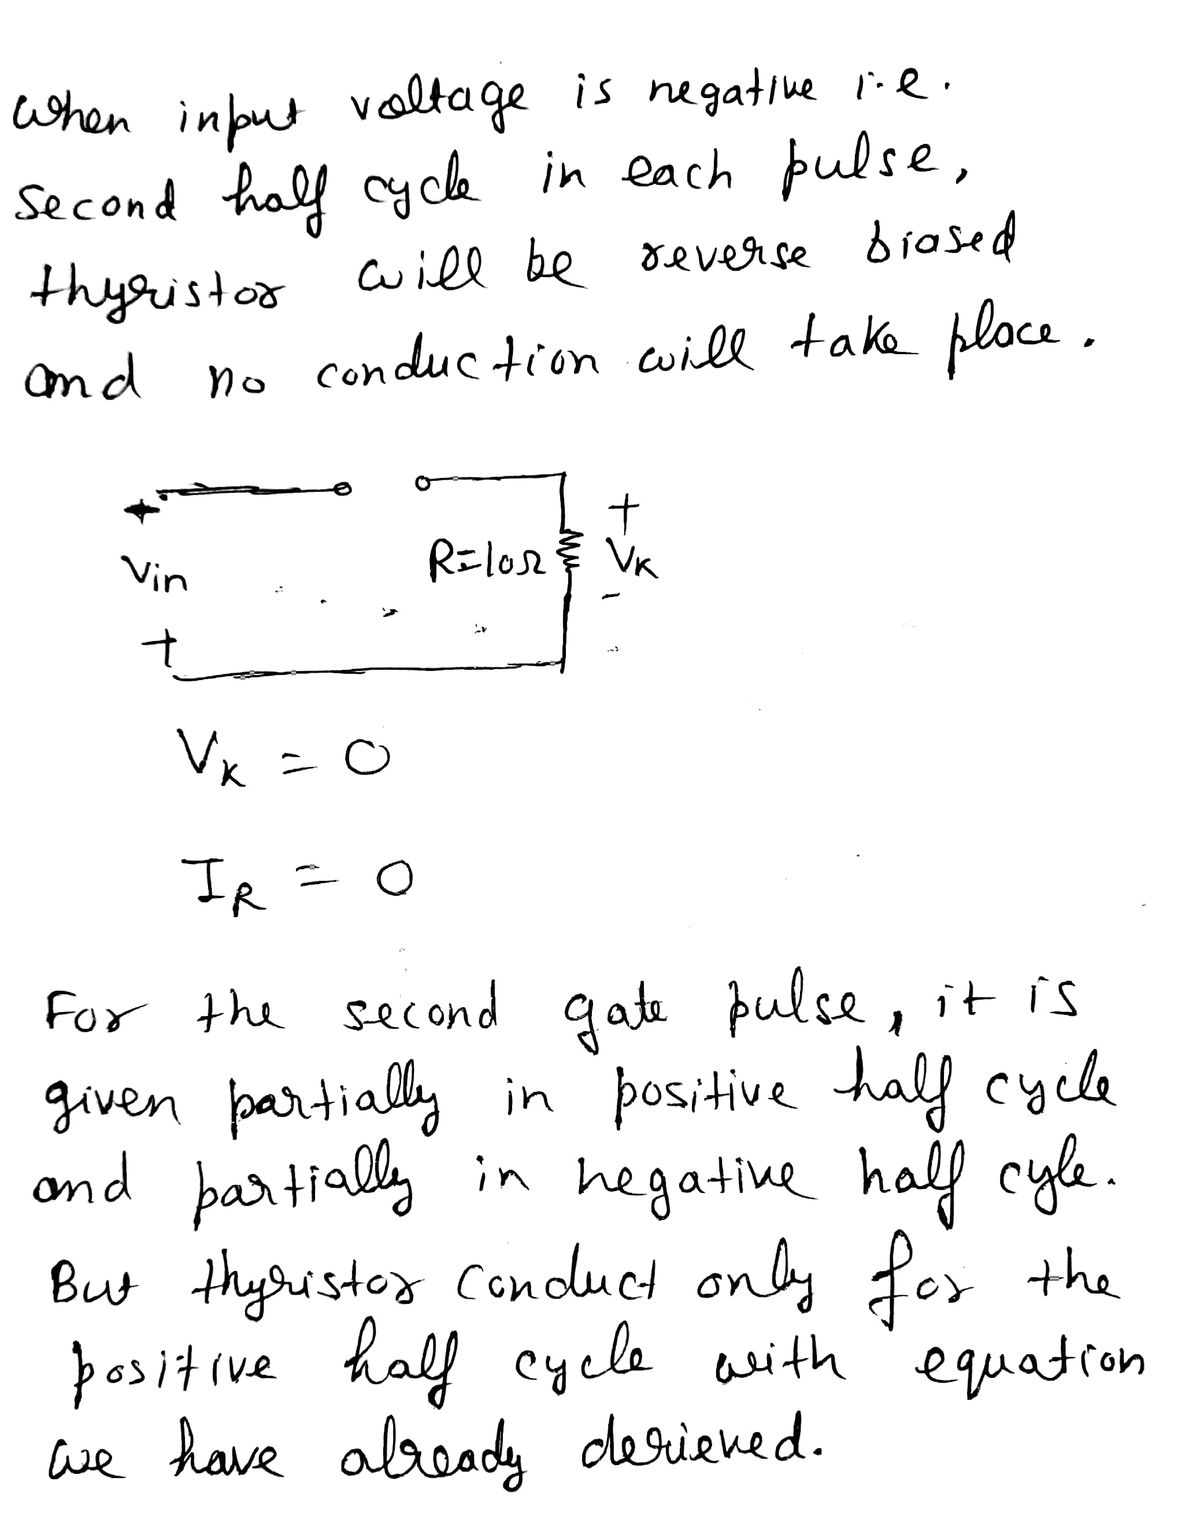 Electrical Engineering homework question answer, step 3, image 1